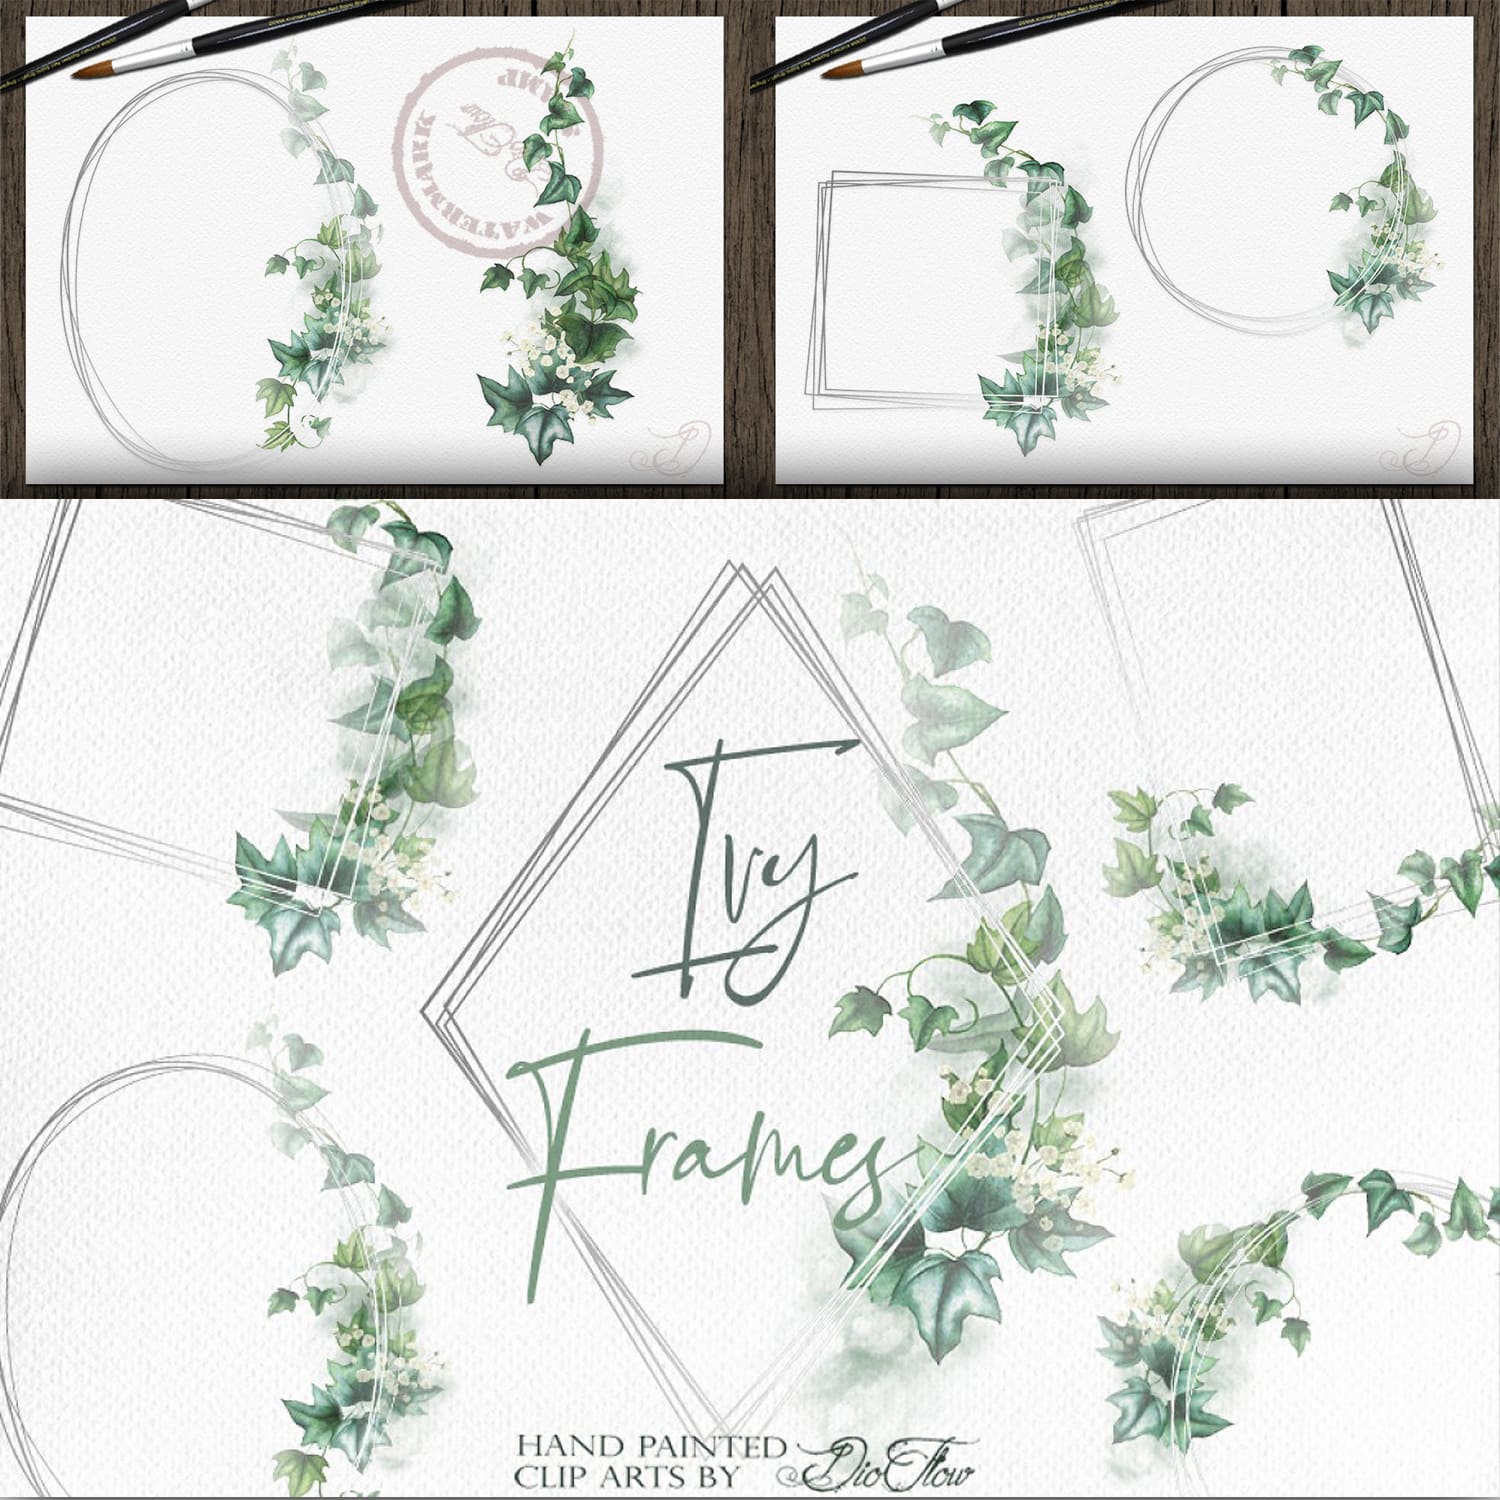 Ivy Watercolor Frames cover.